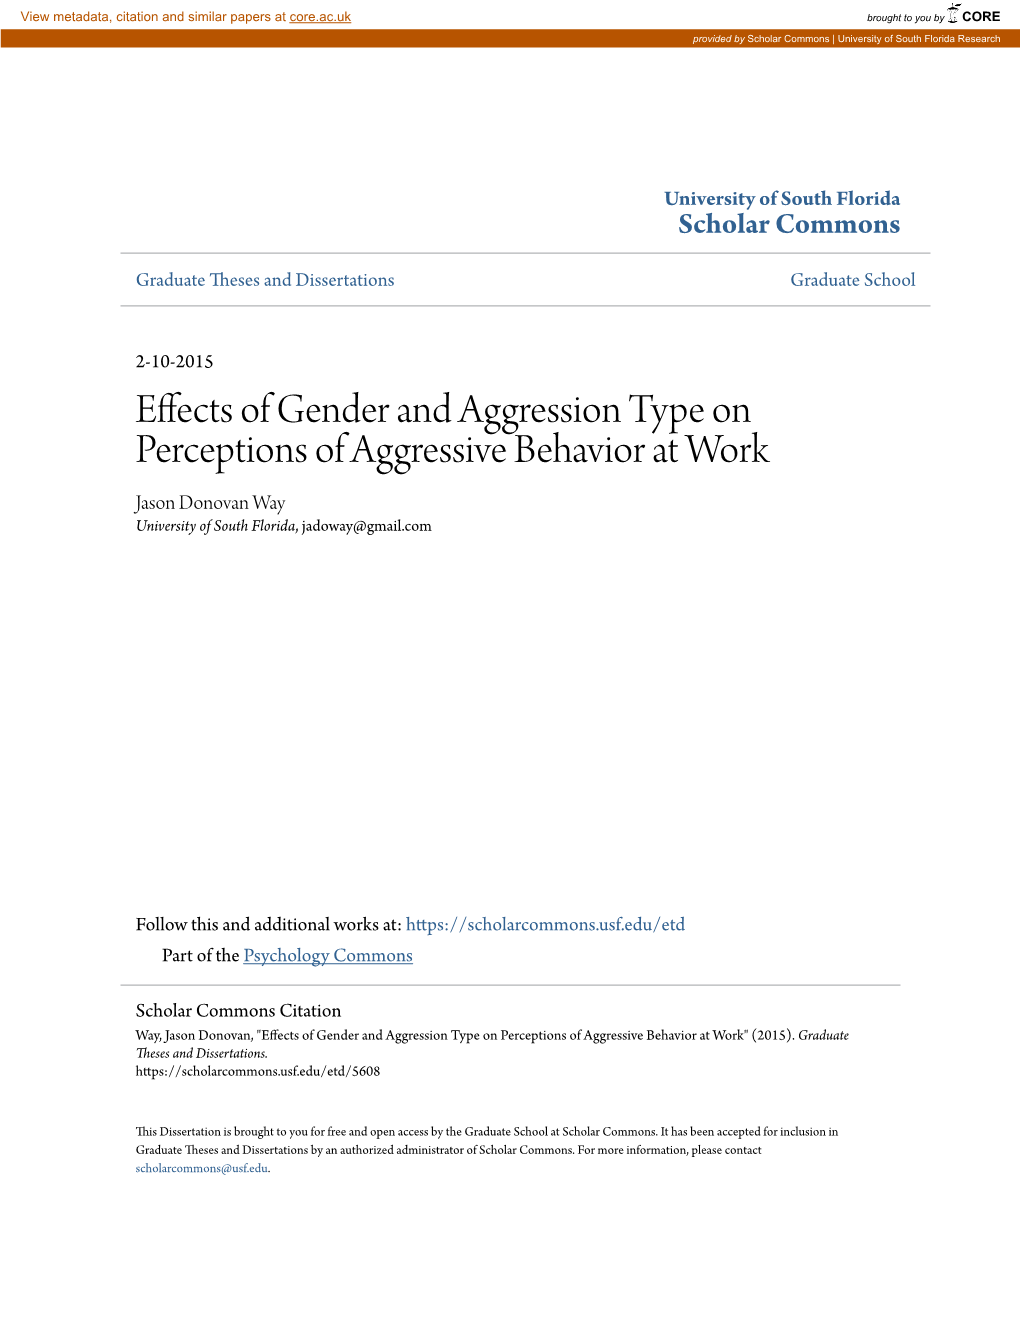 Effects of Gender and Aggression Type on Perceptions of Aggressive Behavior at Work Jason Donovan Way University of South Florida, Jadoway@Gmail.Com